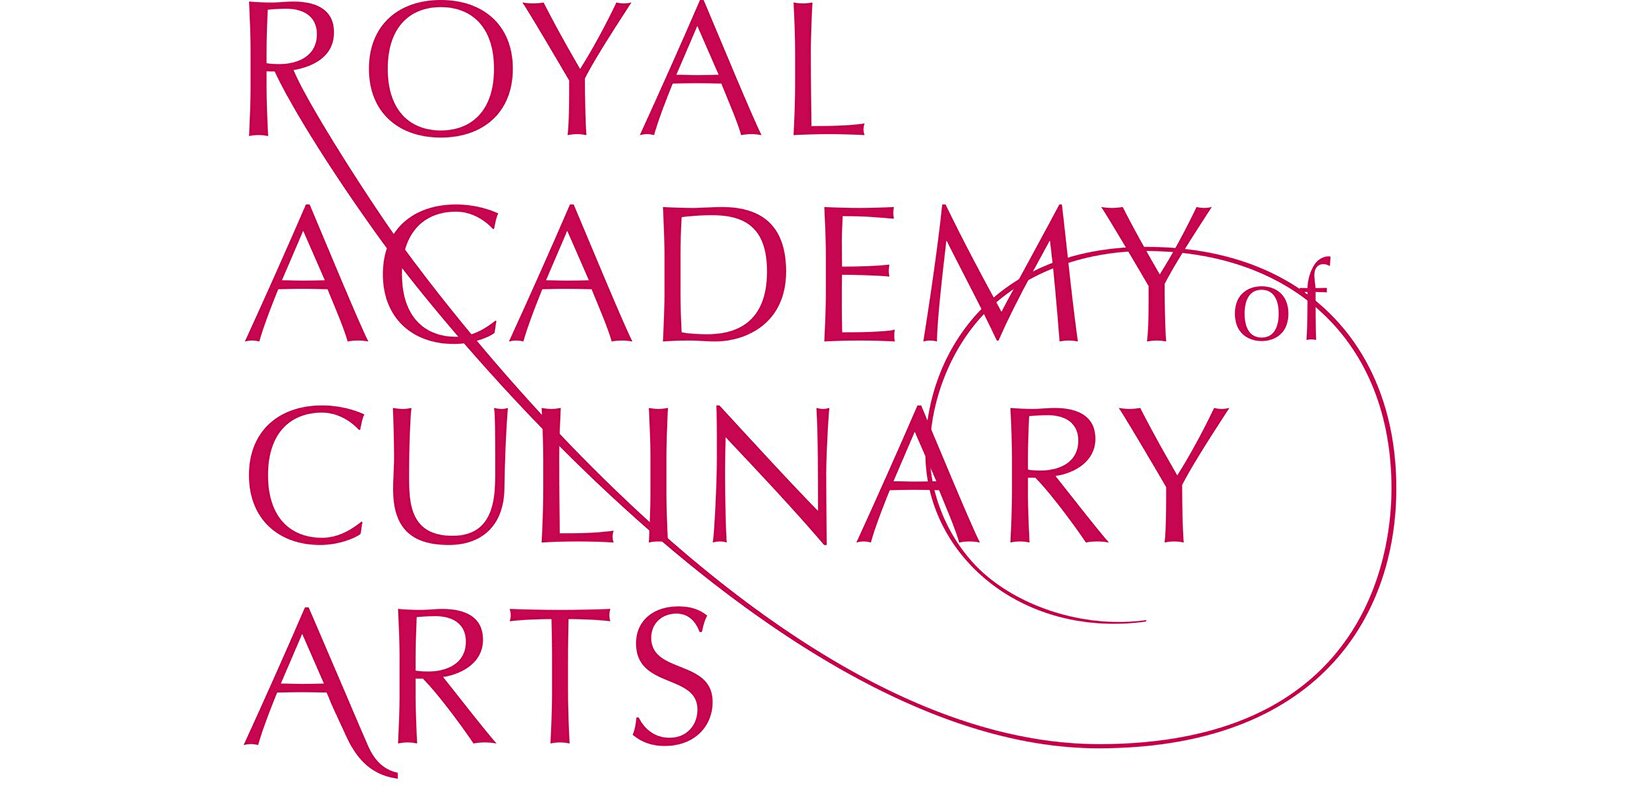 Royal Academy of Culinary Arts’ College Community programme secures £300,000 boost 